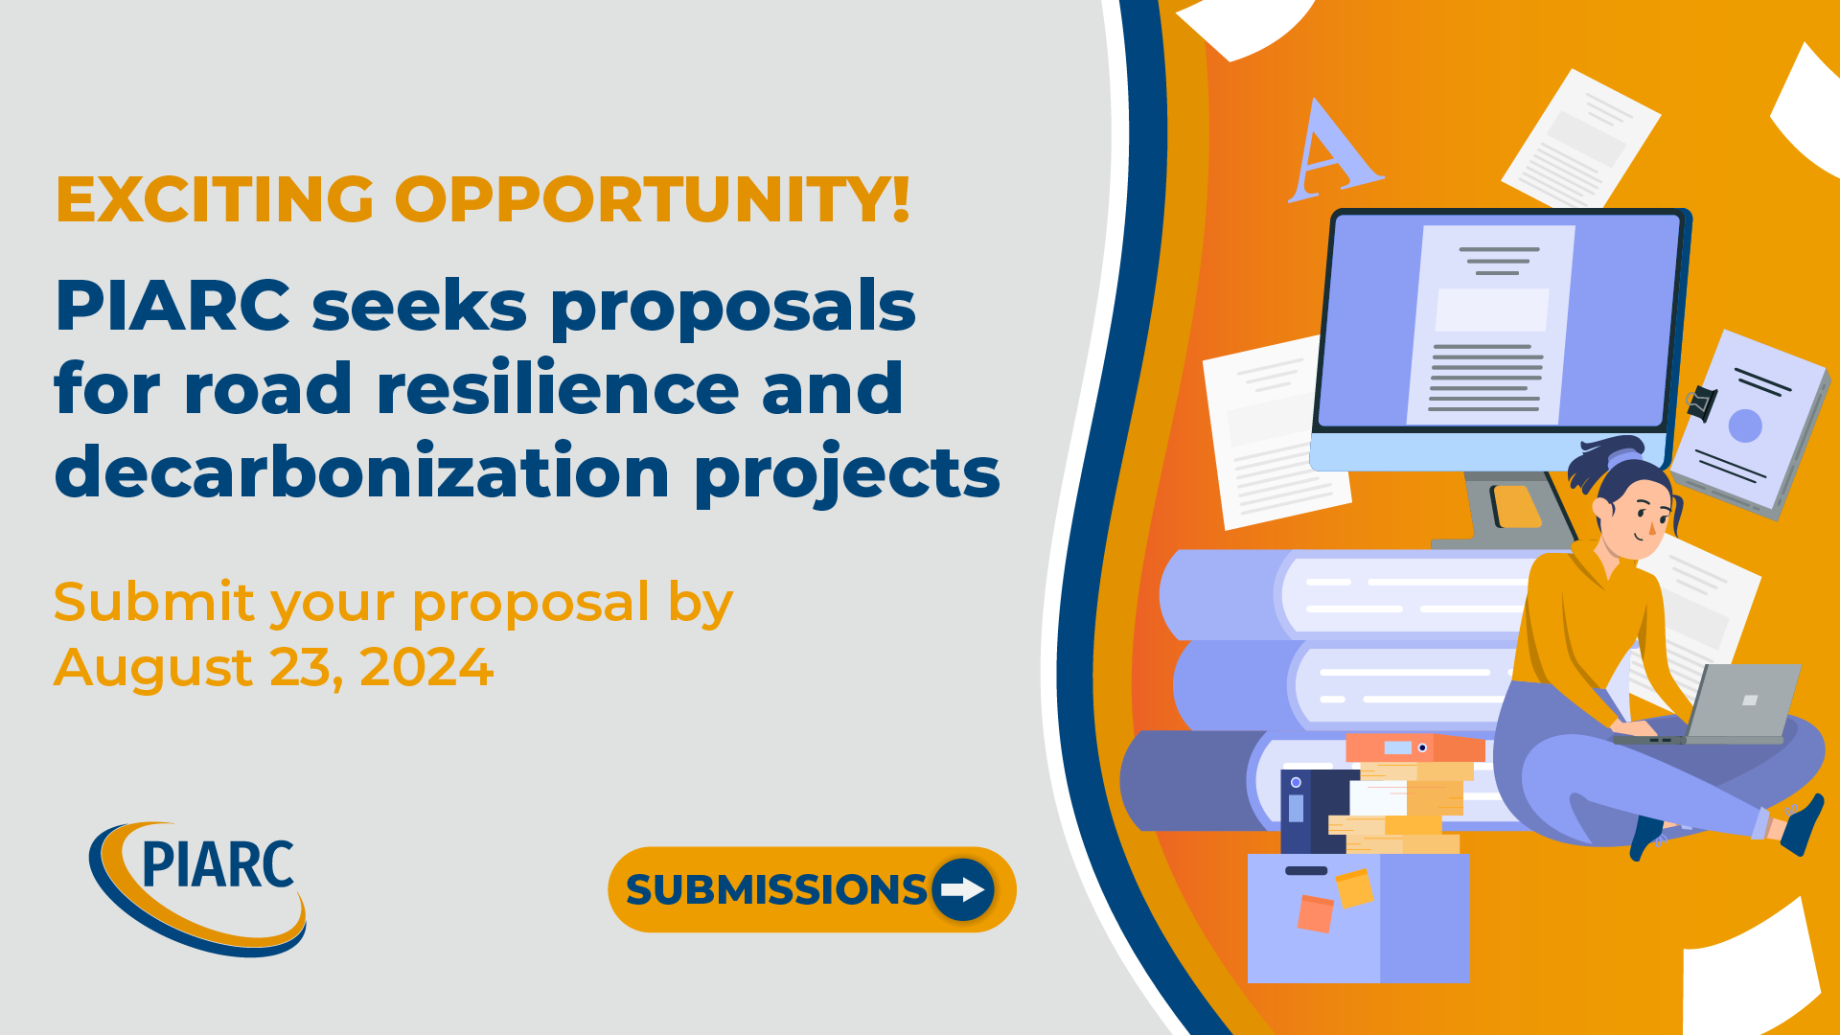 Exciting opportunity: PIARC seeks proposals for road resilience and decarbonization projects